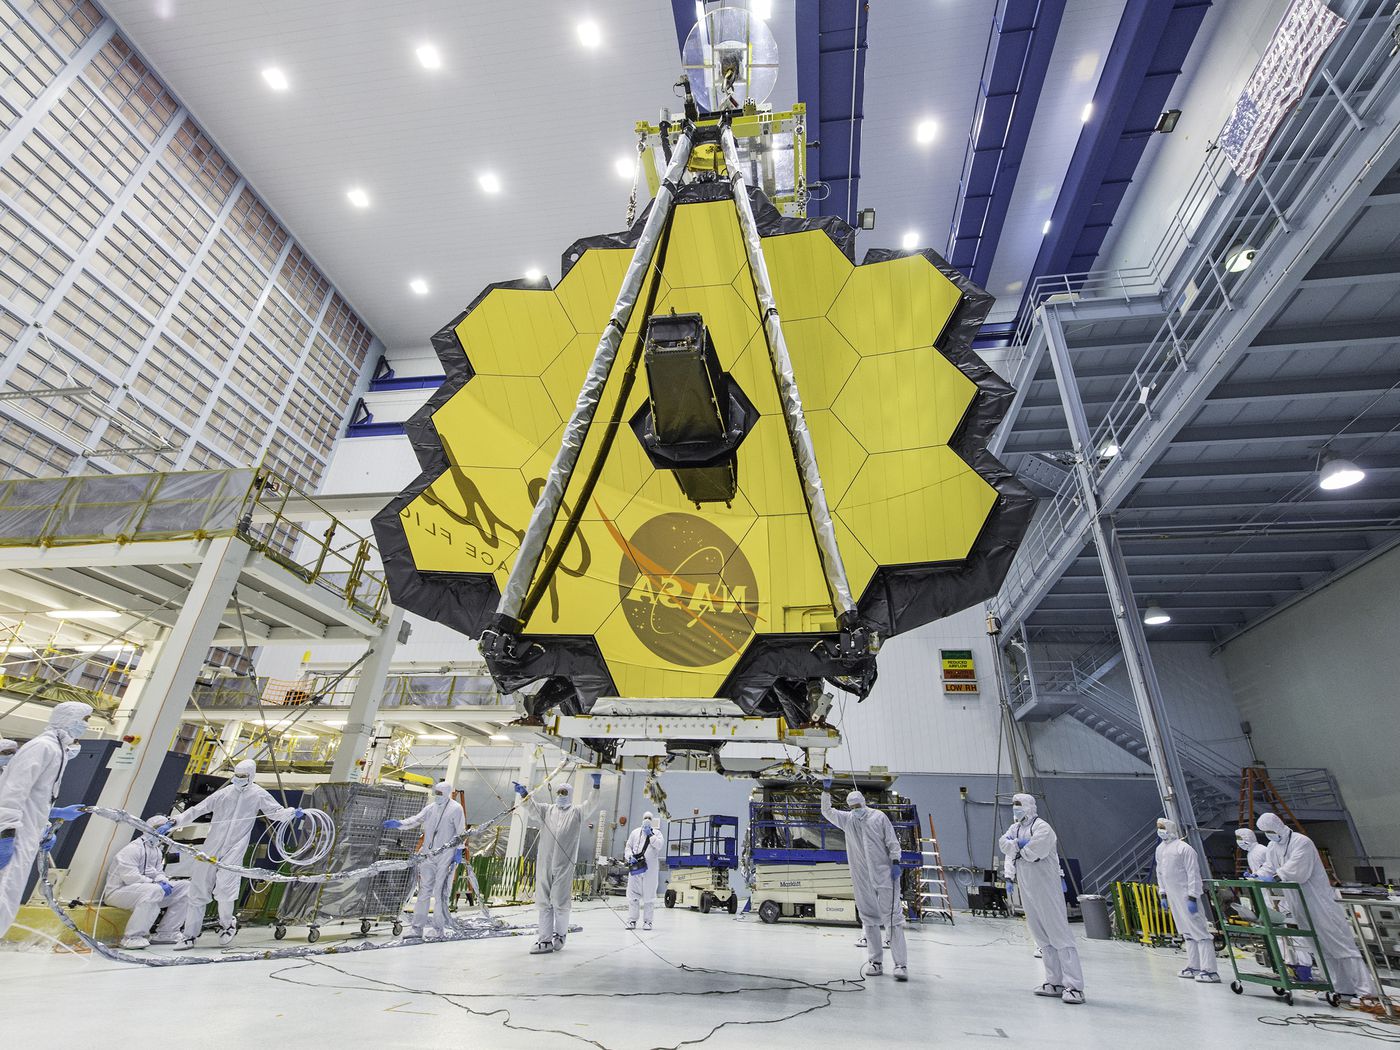 James Webb Space Telescope: news and updates from NASA&#39;s mission - The Verge